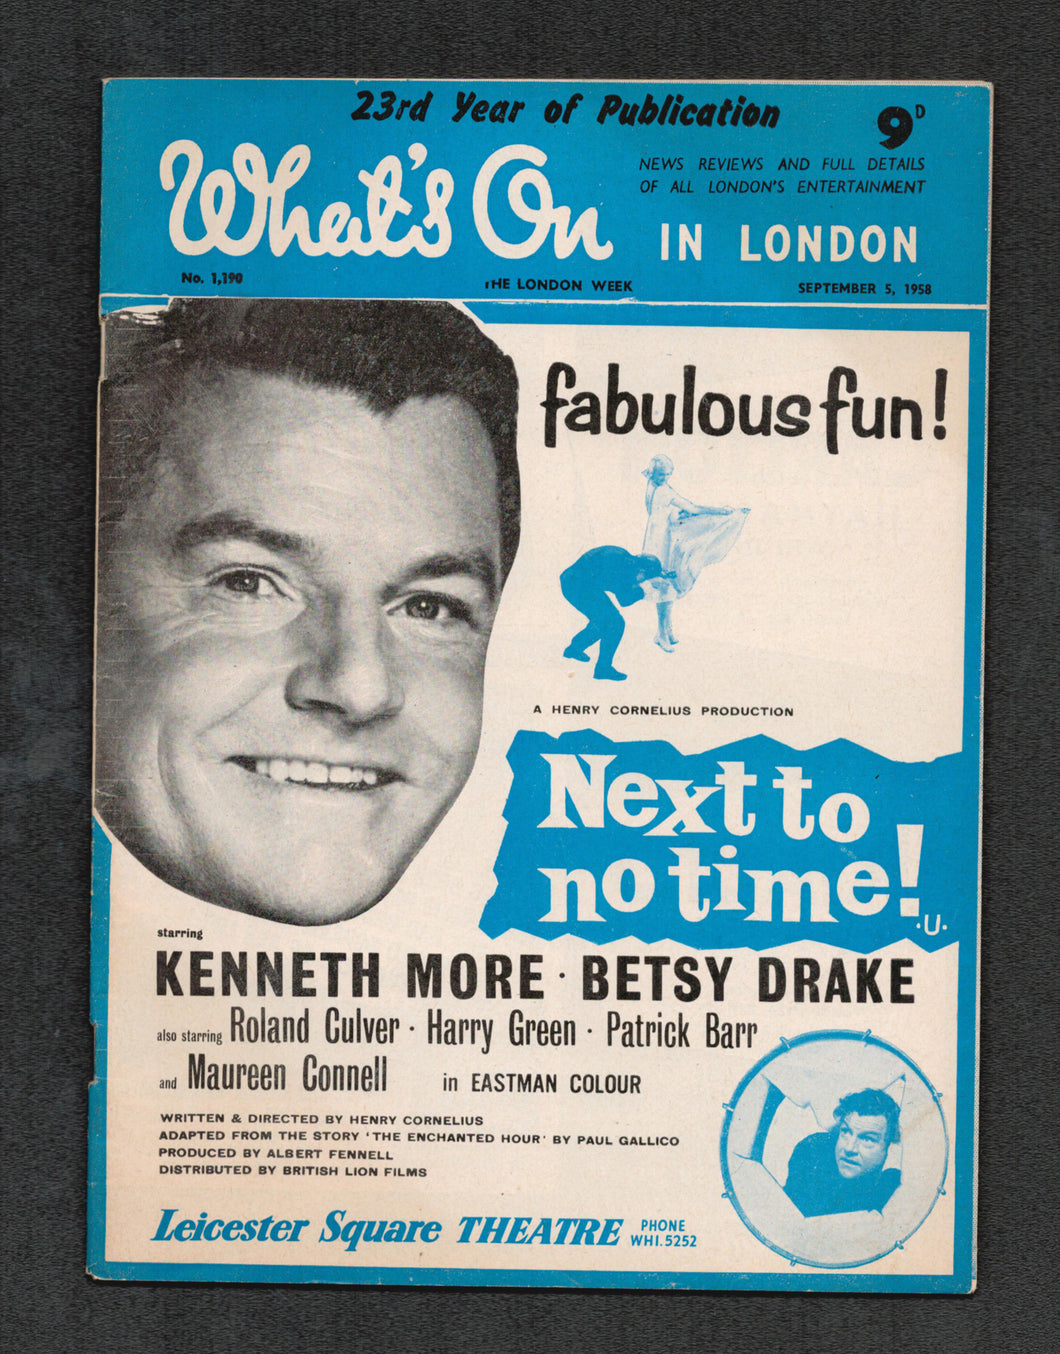 Whats On No 1190 Sept 5 1958